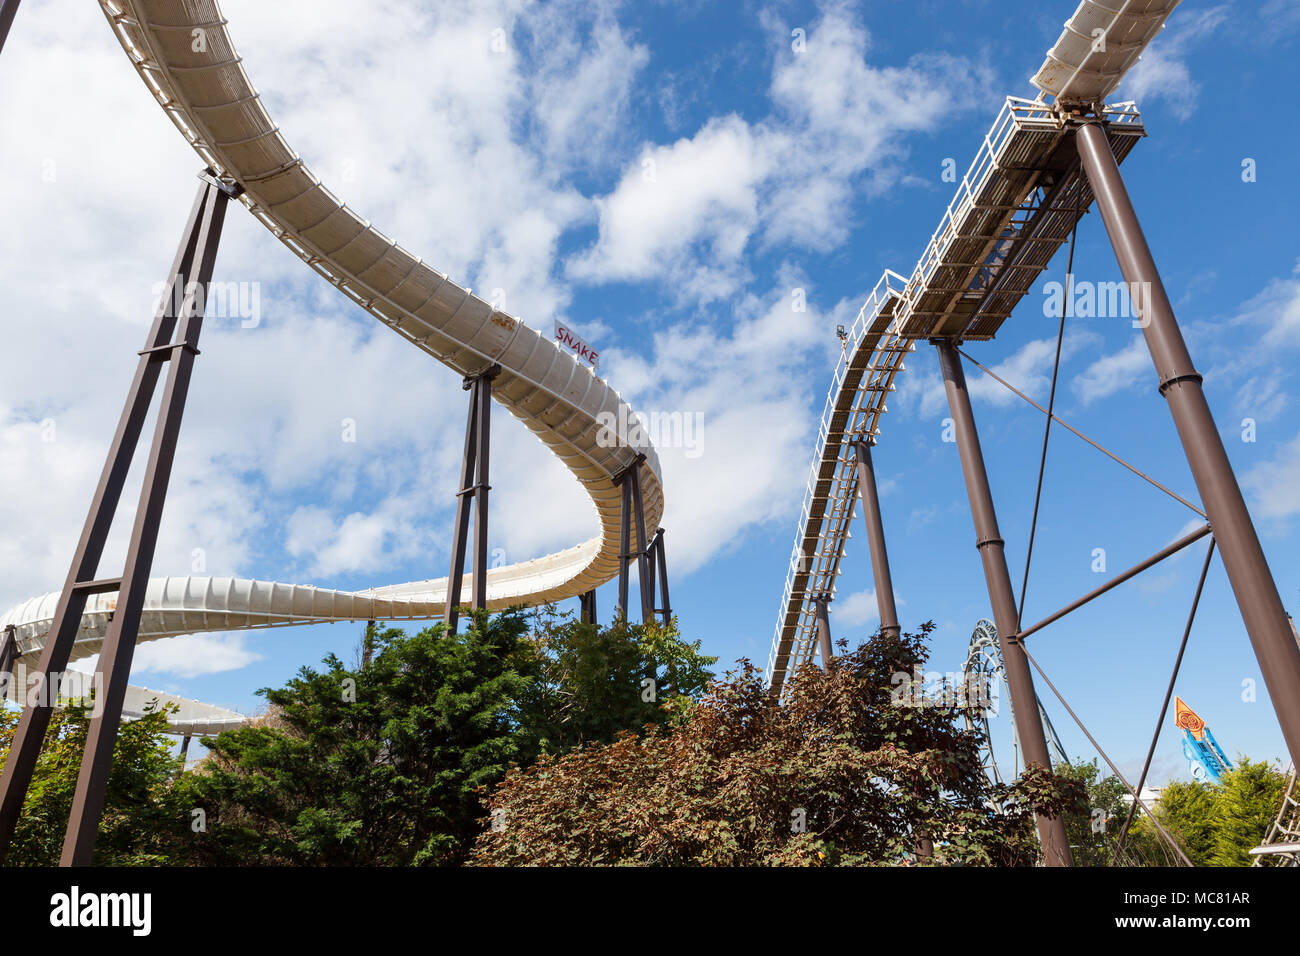 Underneath the Avalanche, a roller coaster, at Blackpool Pleasure Beach, UK. Stock Photo